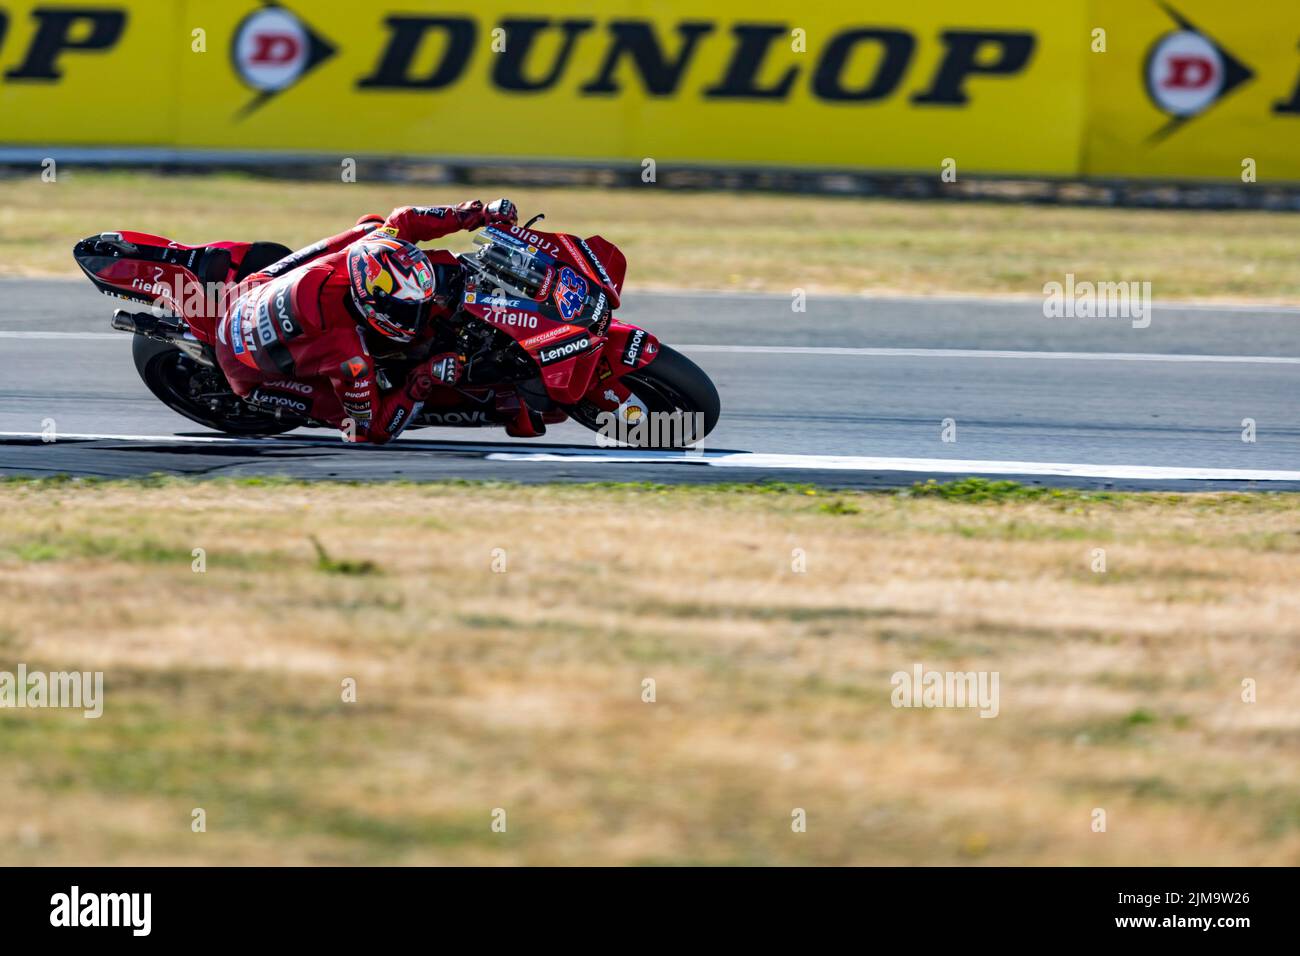 Silverstone, UK. 5th August 2022; Silverstone Circuit, Silverstone, Northamptonshire, England: British MotoGP Grand Prix, Free Practice: Number 43 Ducati Lenovo Team bike ridden by Jack Miller during free practice at the British MotoGP Credit: Action Plus Sports Images/Alamy Live News Stock Photo